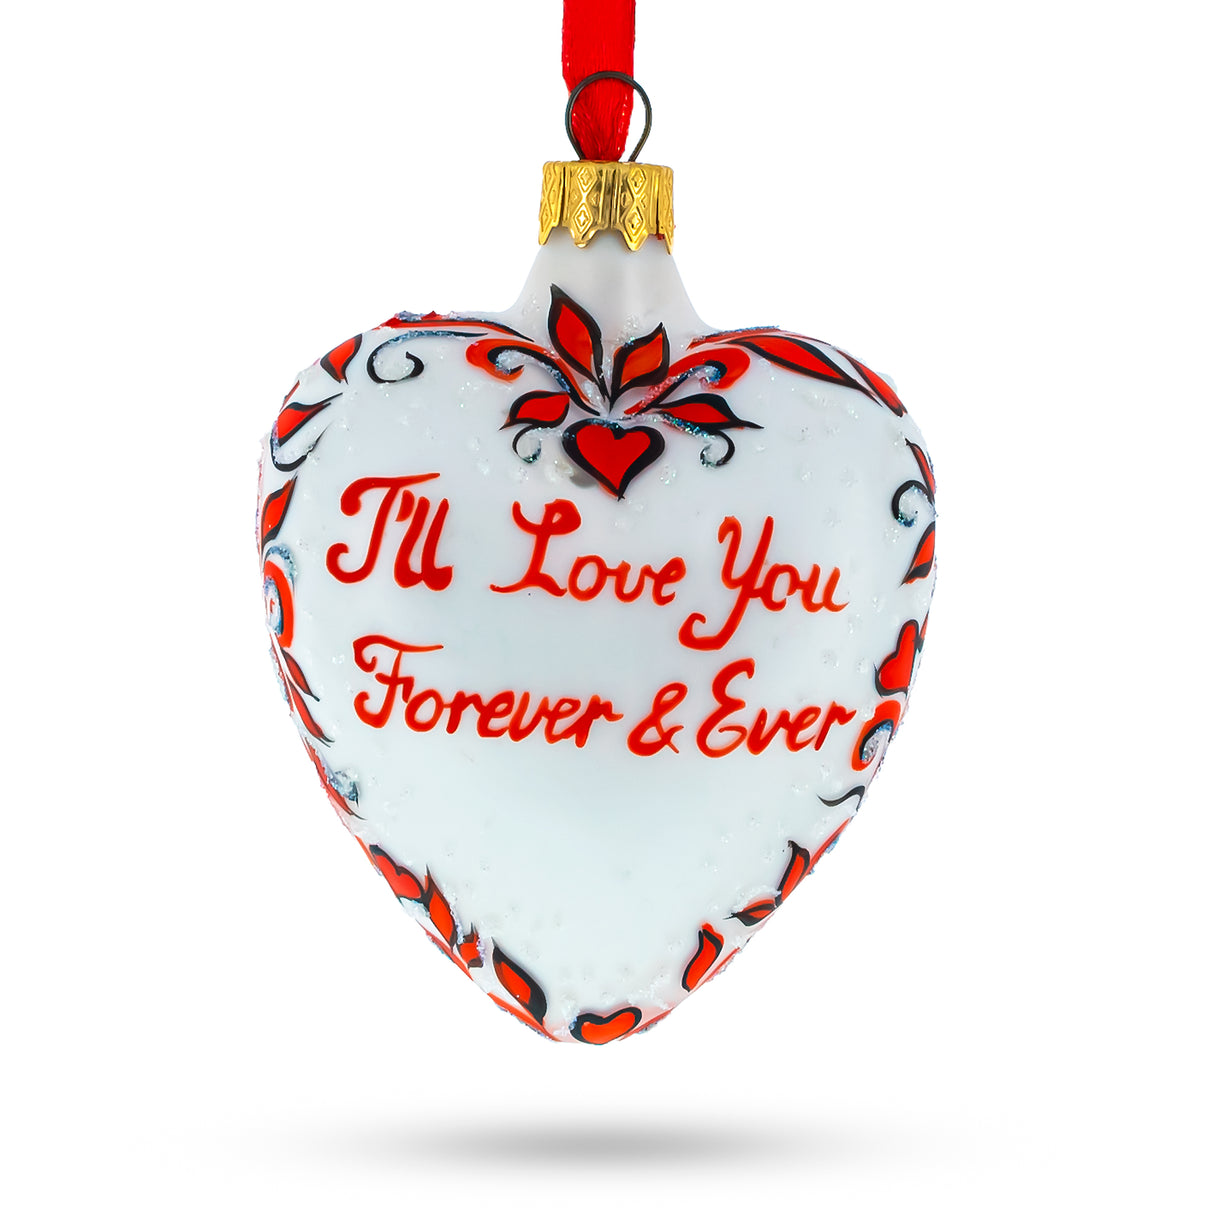 Glass Love You Forever Red Heart Valentine's Glass Ornament in Red color Heart